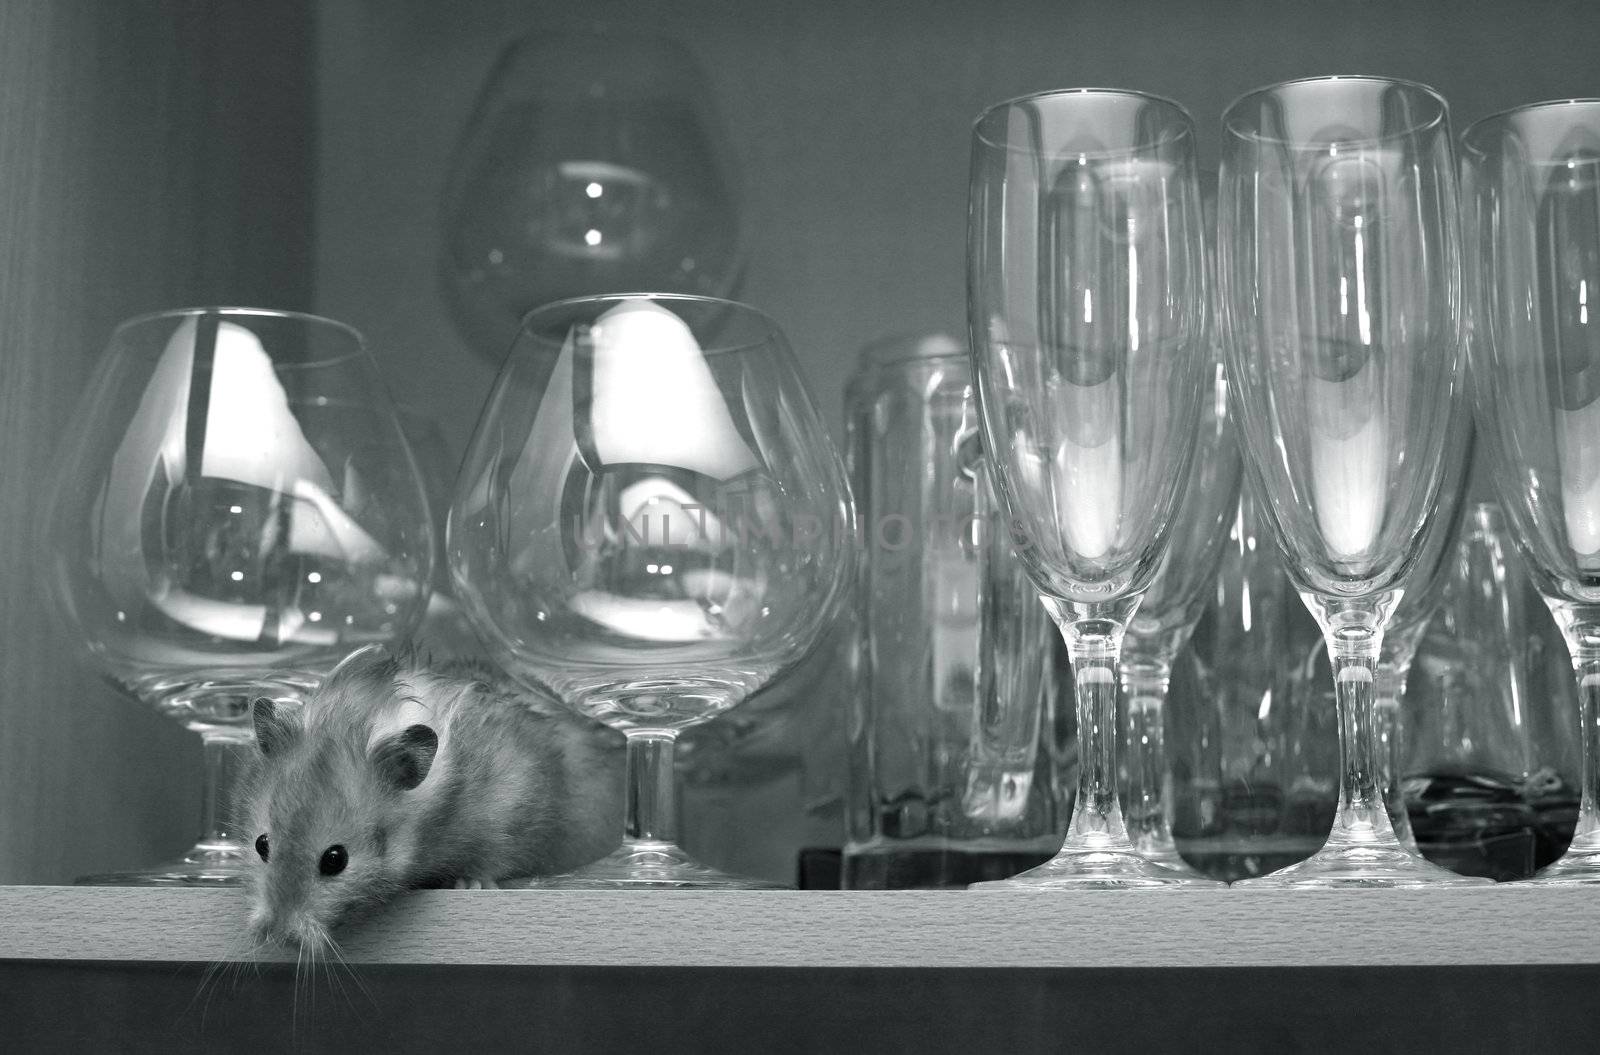 Hamster in a shelf with glasses. Reflection in glasses is similar to Christmas village with lights